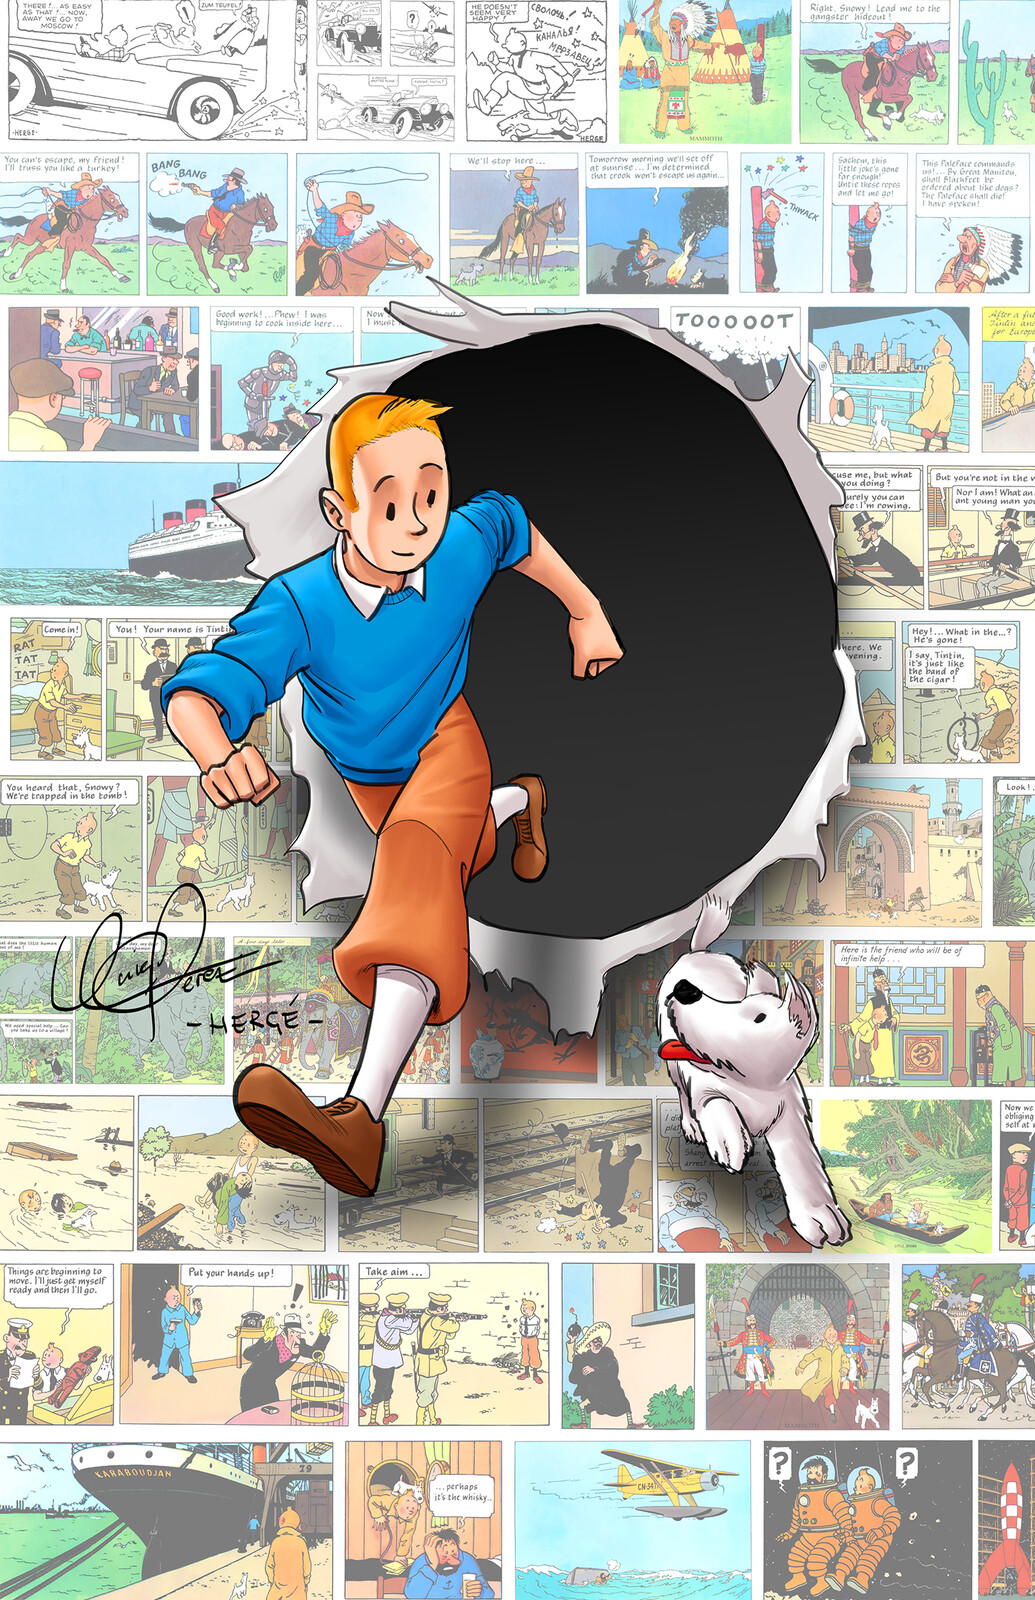 Quick Tintin and Milou piece for the #JuneToon 2020 challenge